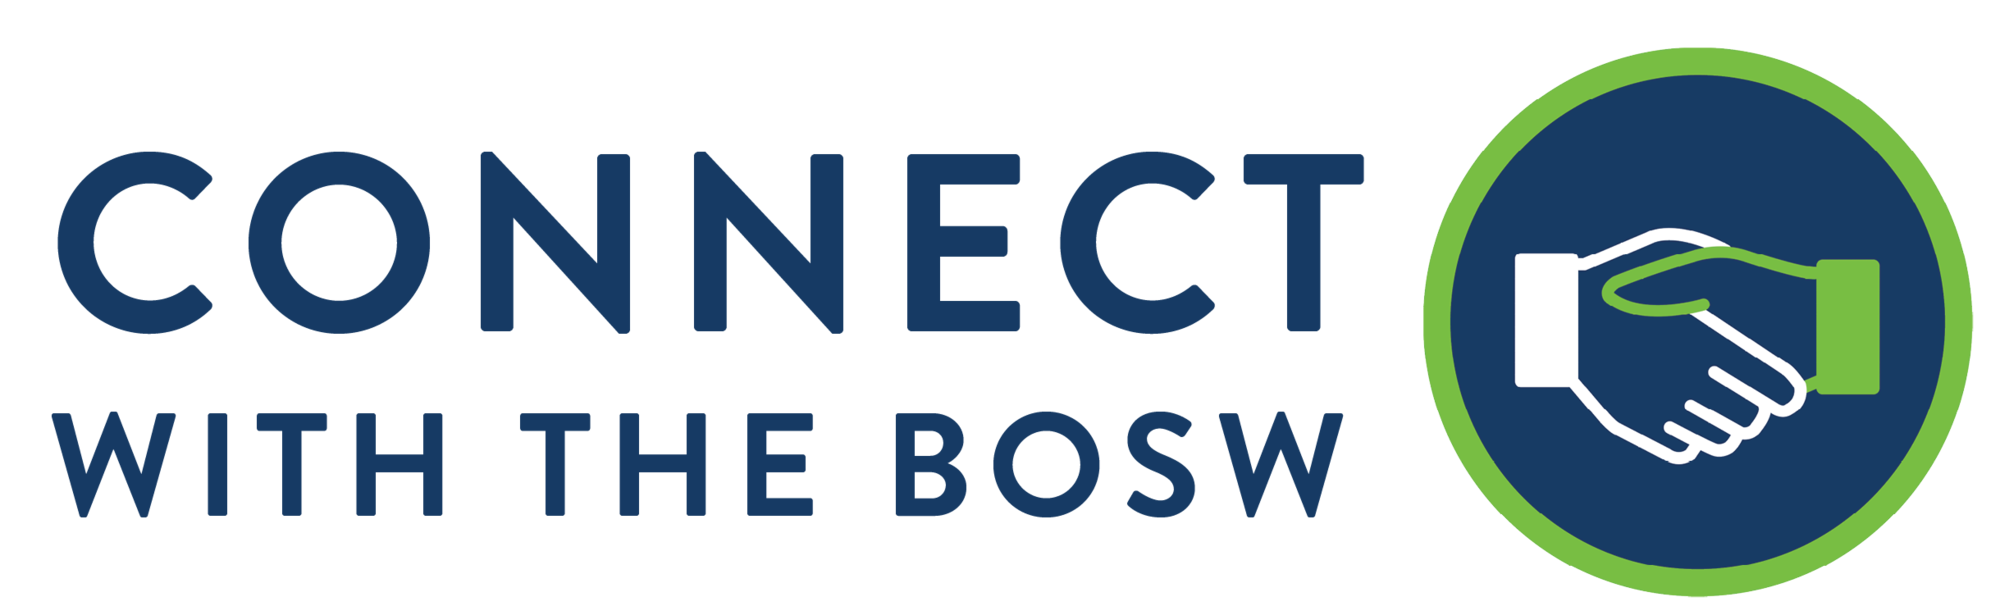 Connect with BOSW